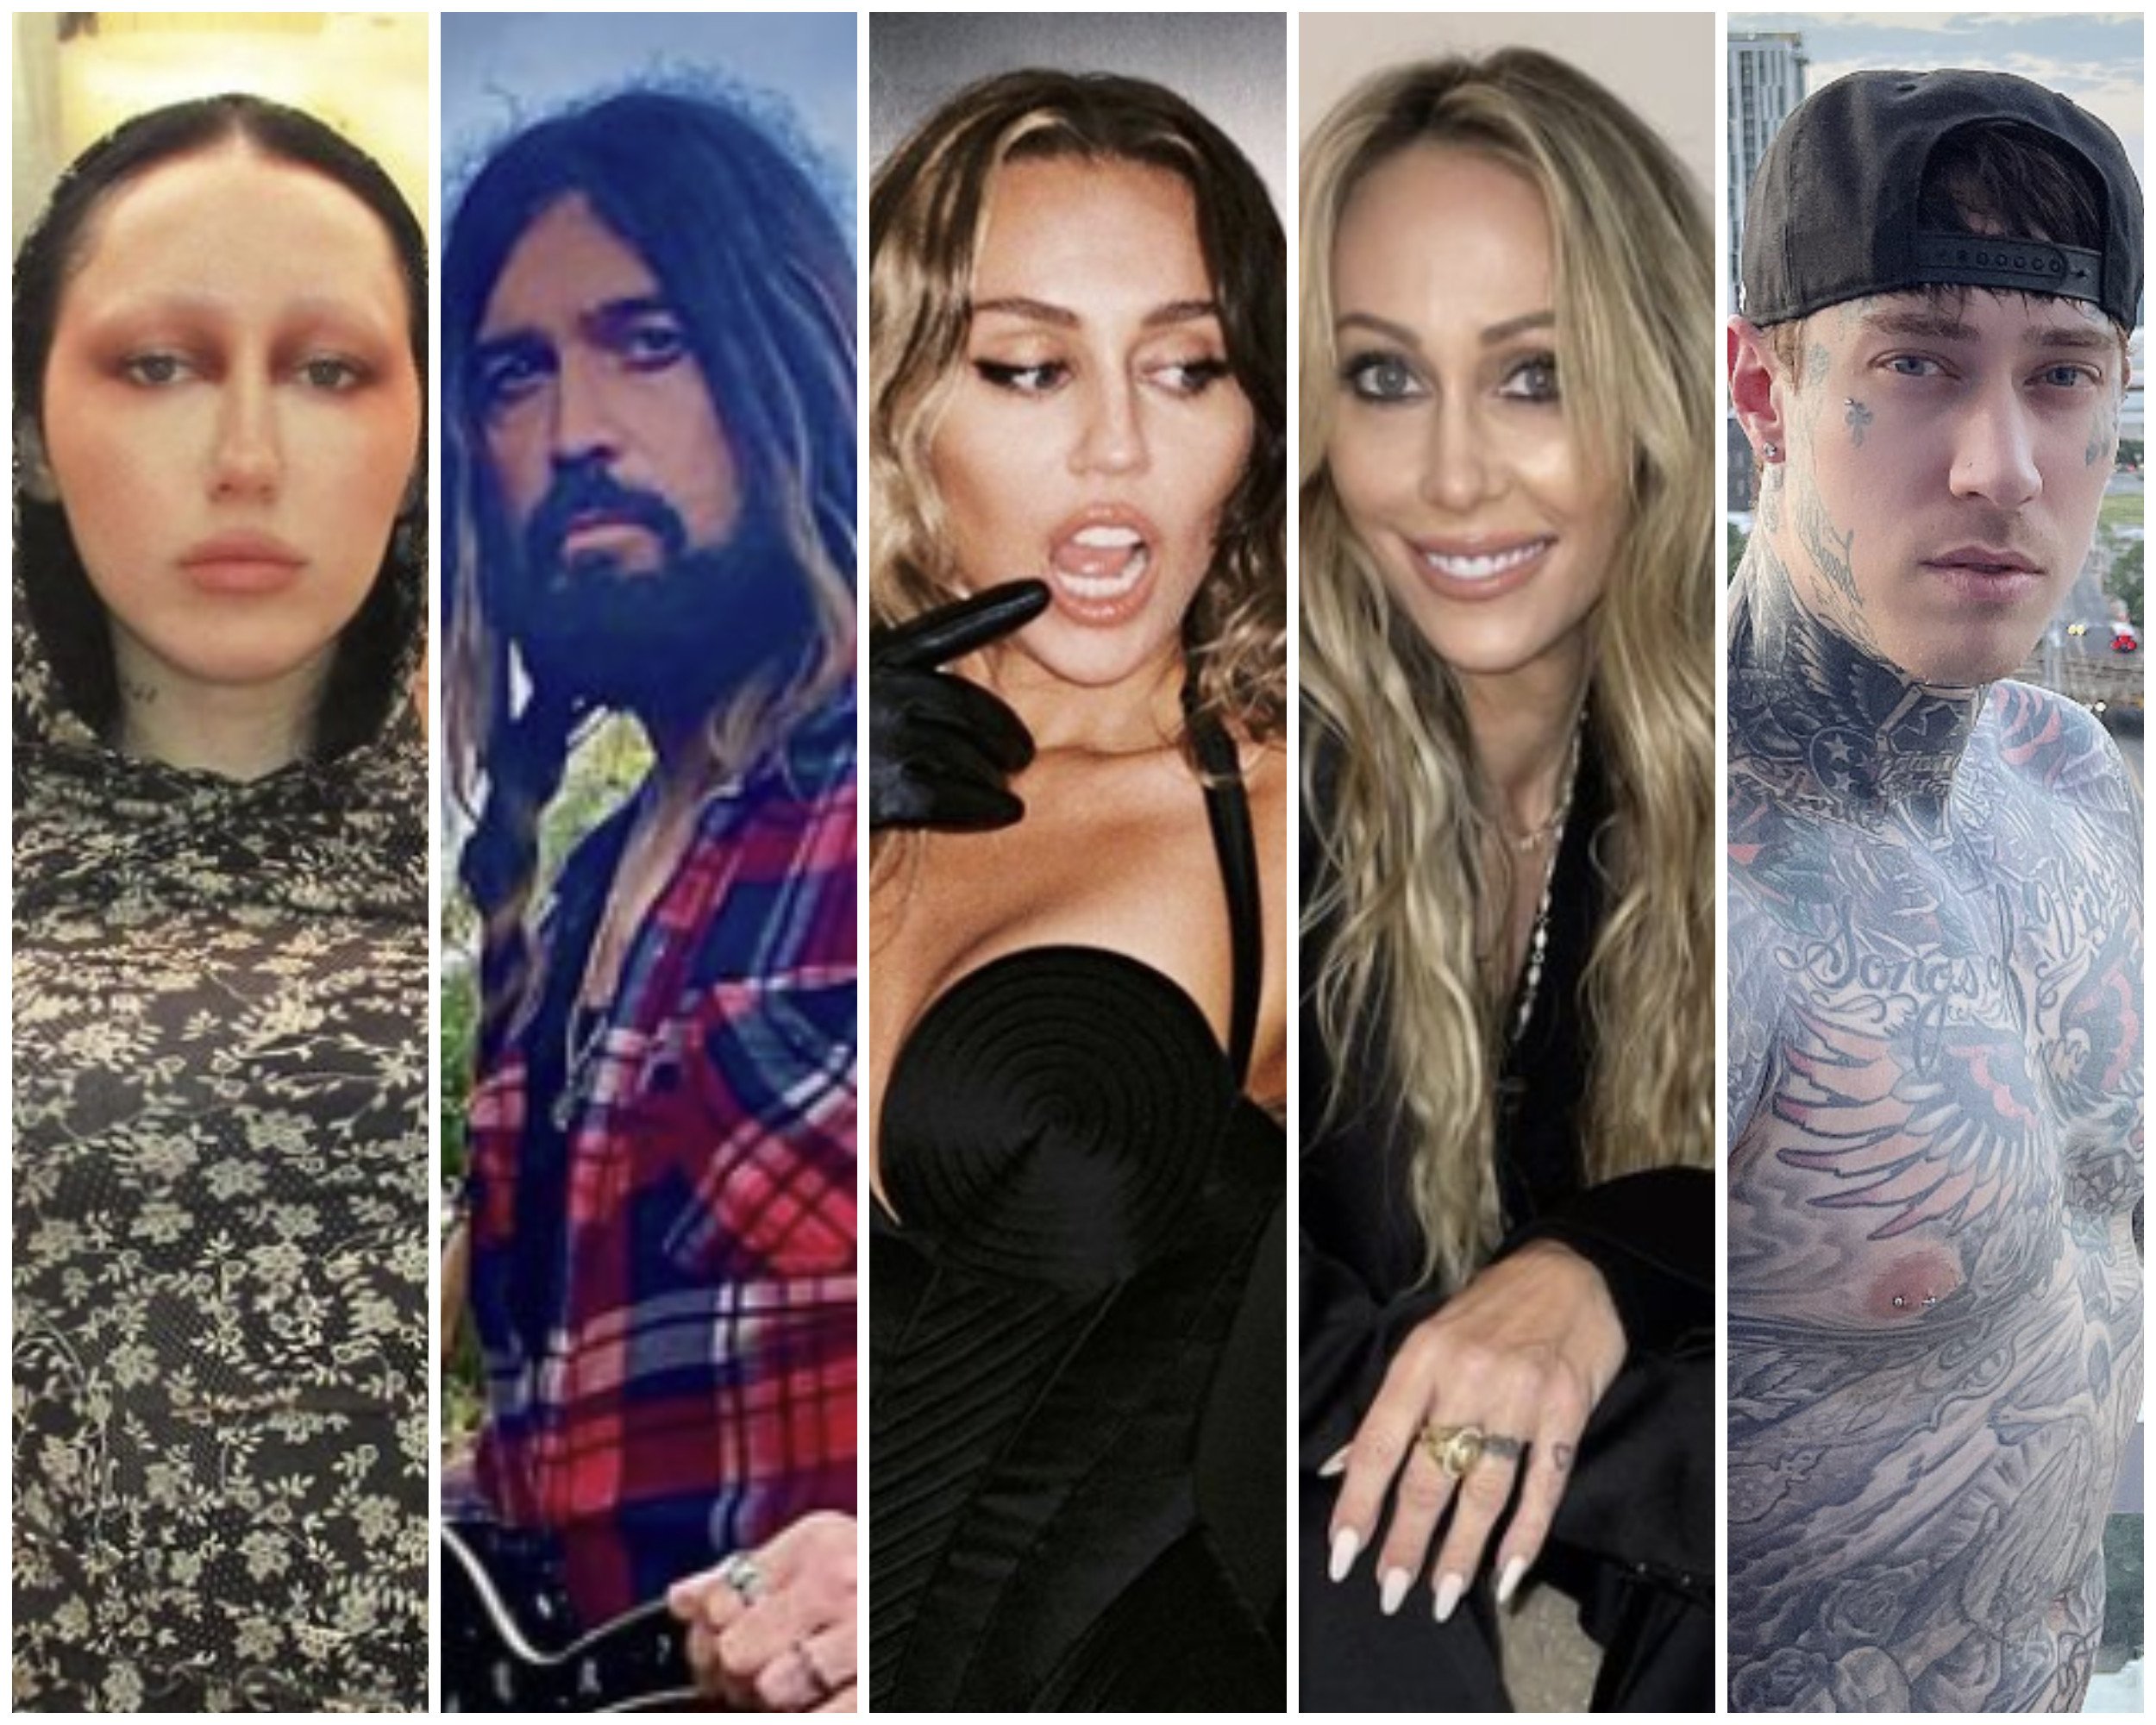 The Cyruses, including Noah, Billy Ray, Miley, Tish and Trace, are among the richest families in showbiz. Photos: @noahcyrus, @billyraycyrus, @tishcyrus, @tracecyrus/Instagram